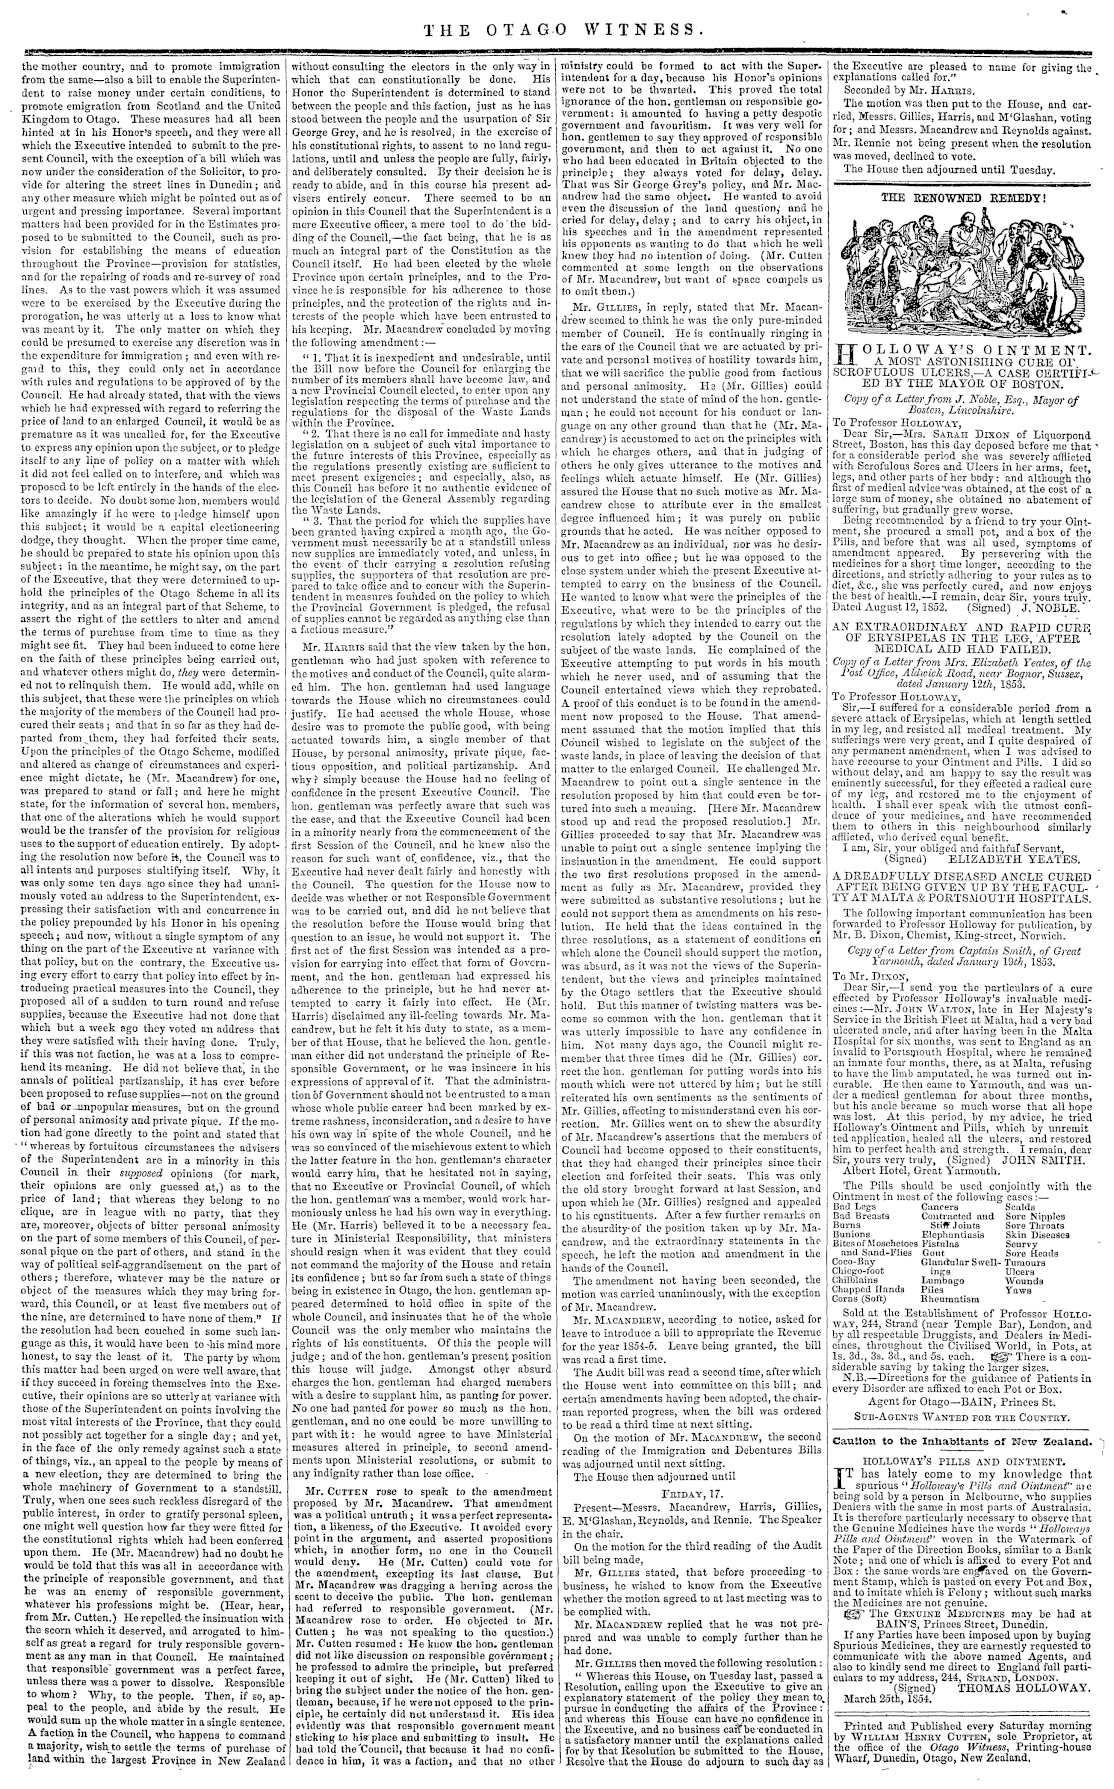 Papers Past Newspapers Otago Witness 25 November 1854 Page 4